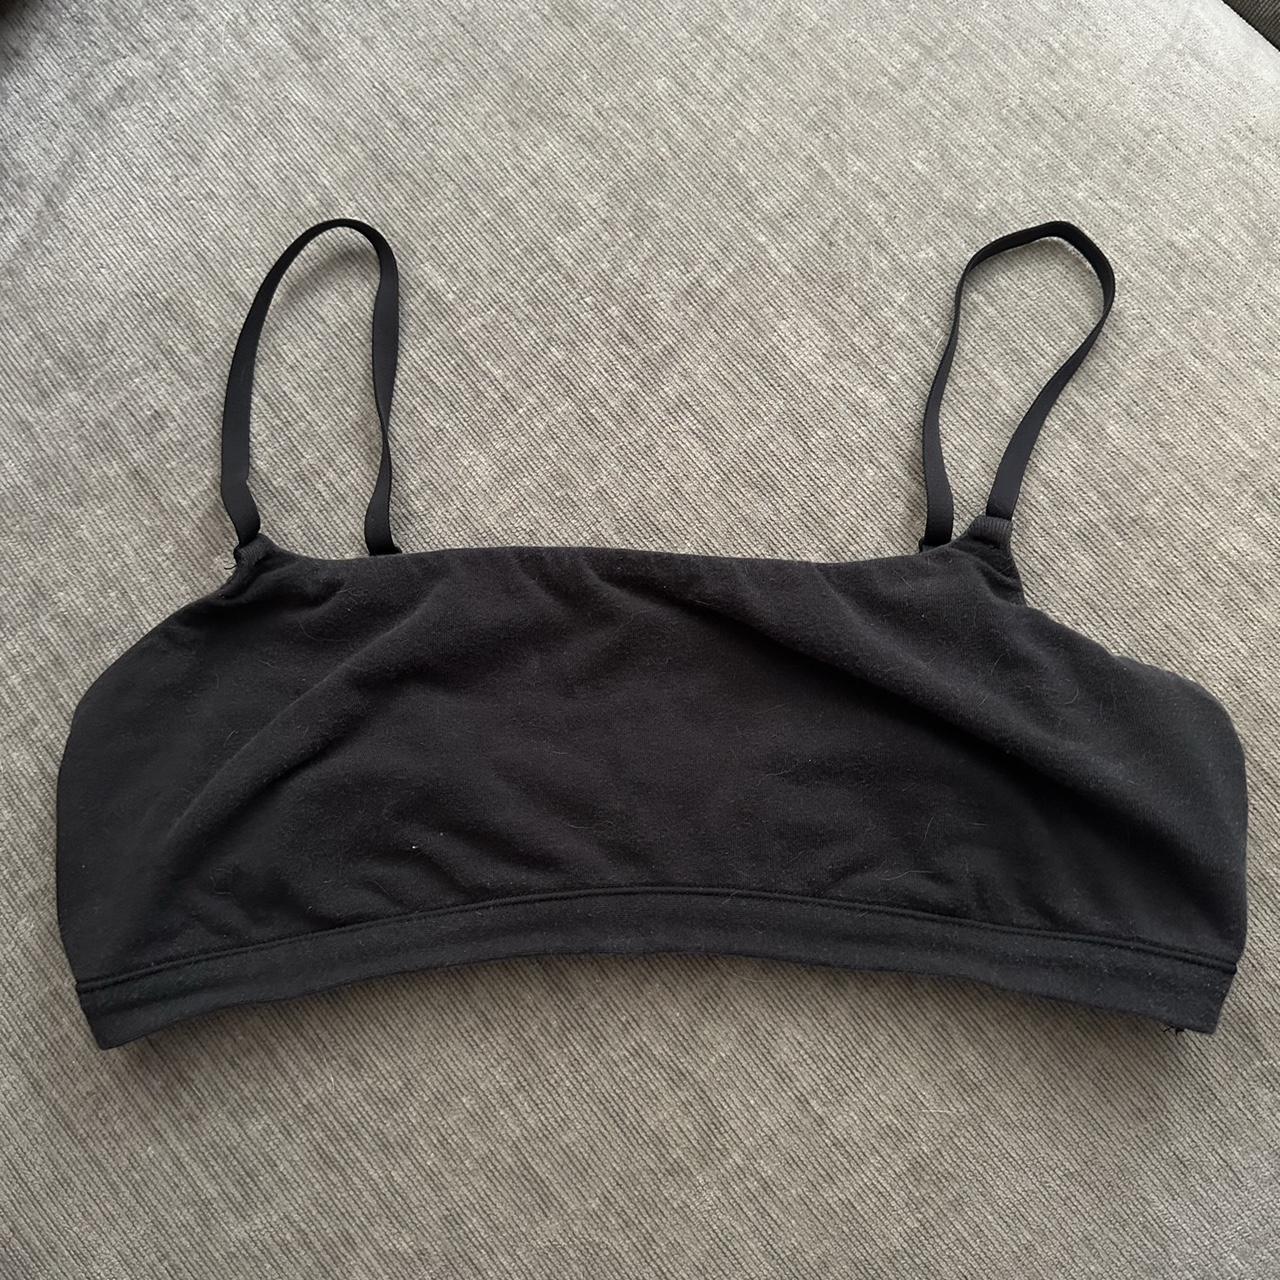 Skims bra size M only worn 3-4 times only downfall